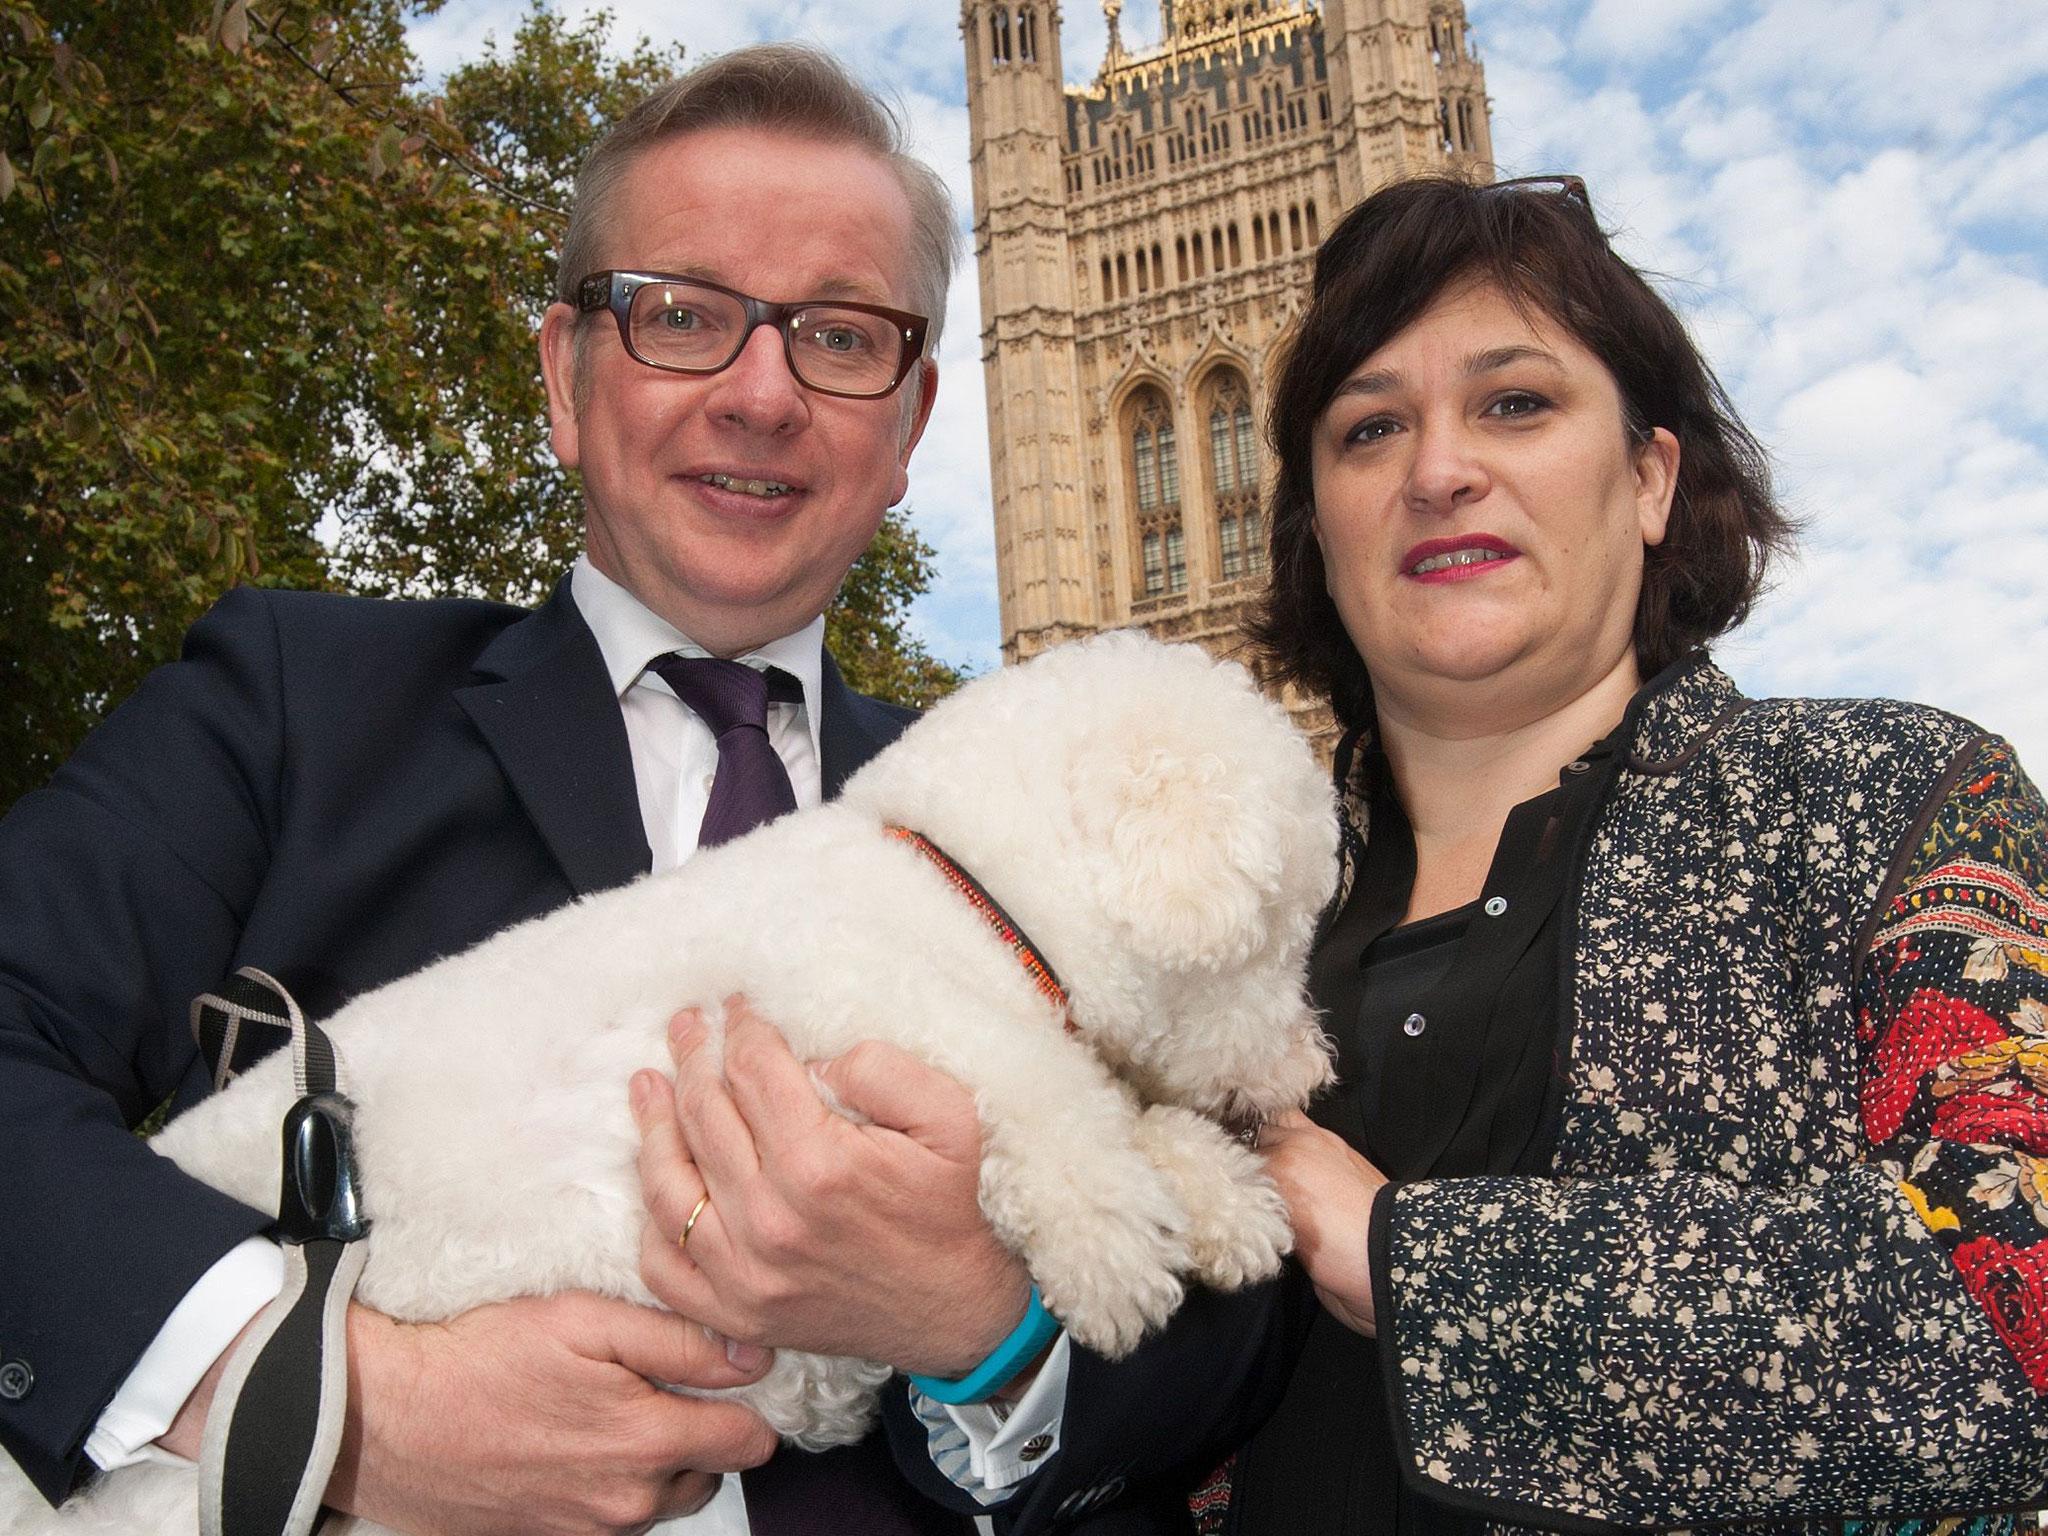 Michael Gove and his wife, the Daily Mail journalist Sarah Vine